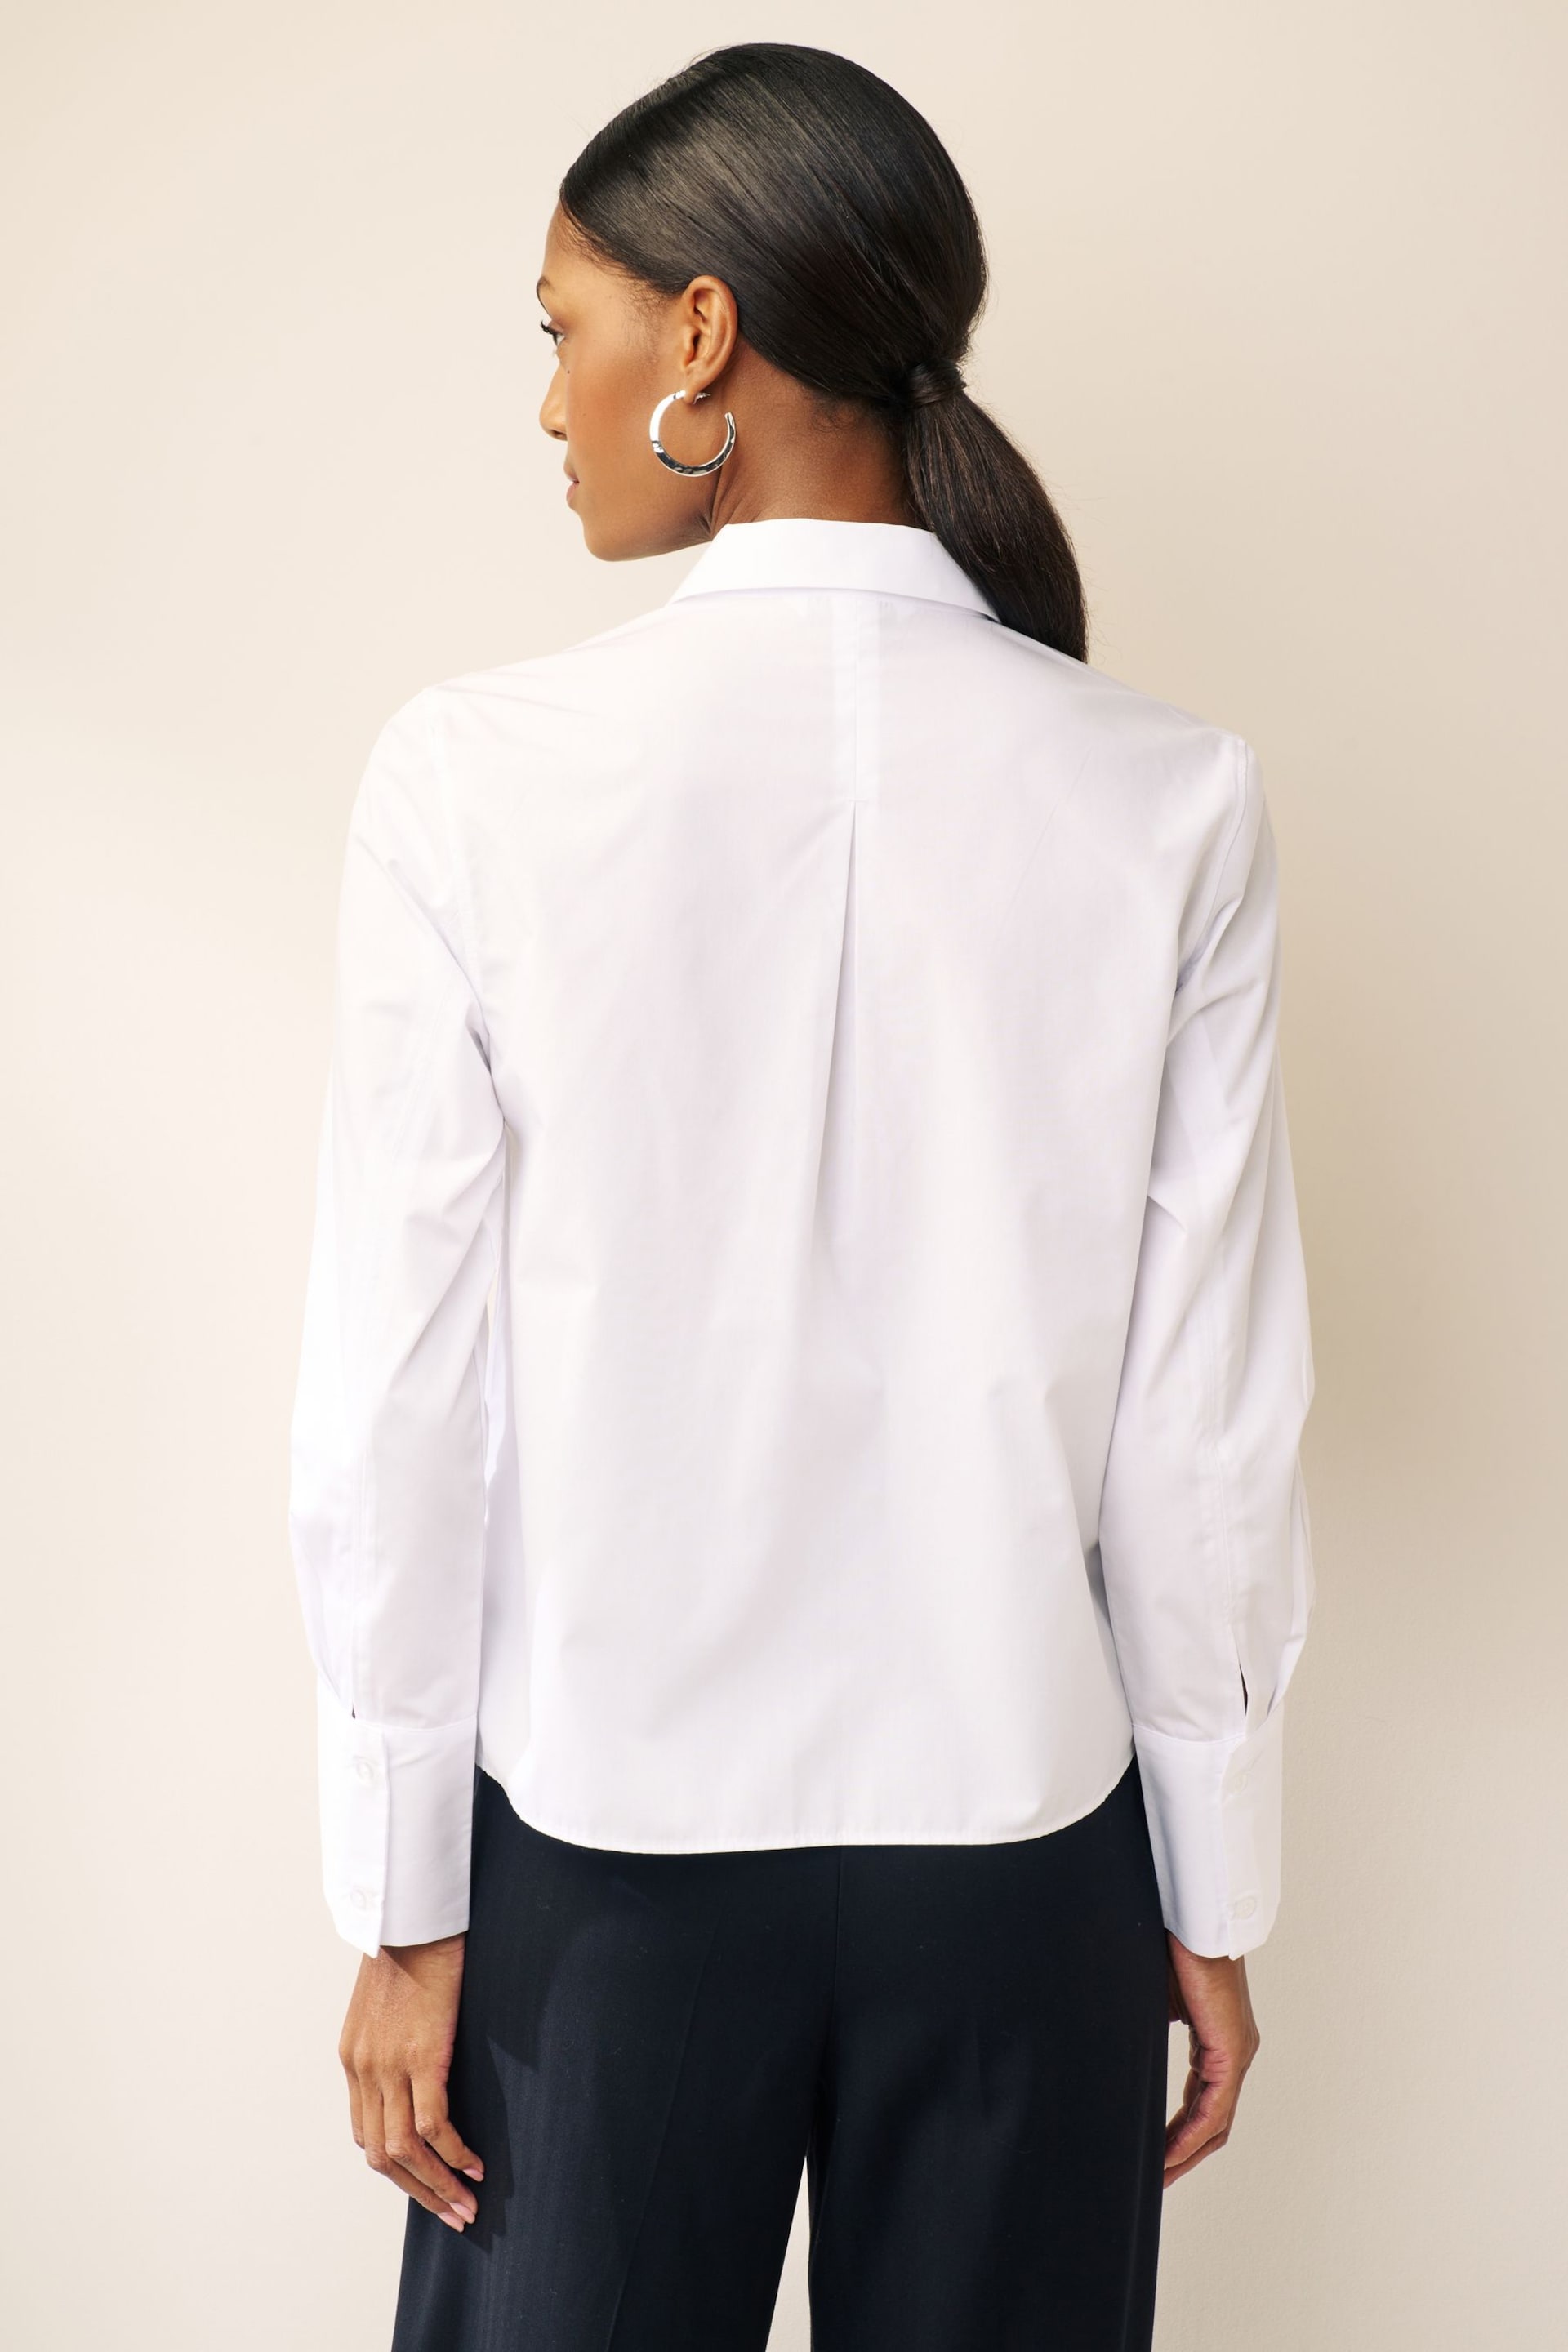 White Fitted Collared Long Sleeve Shirt - Image 2 of 7